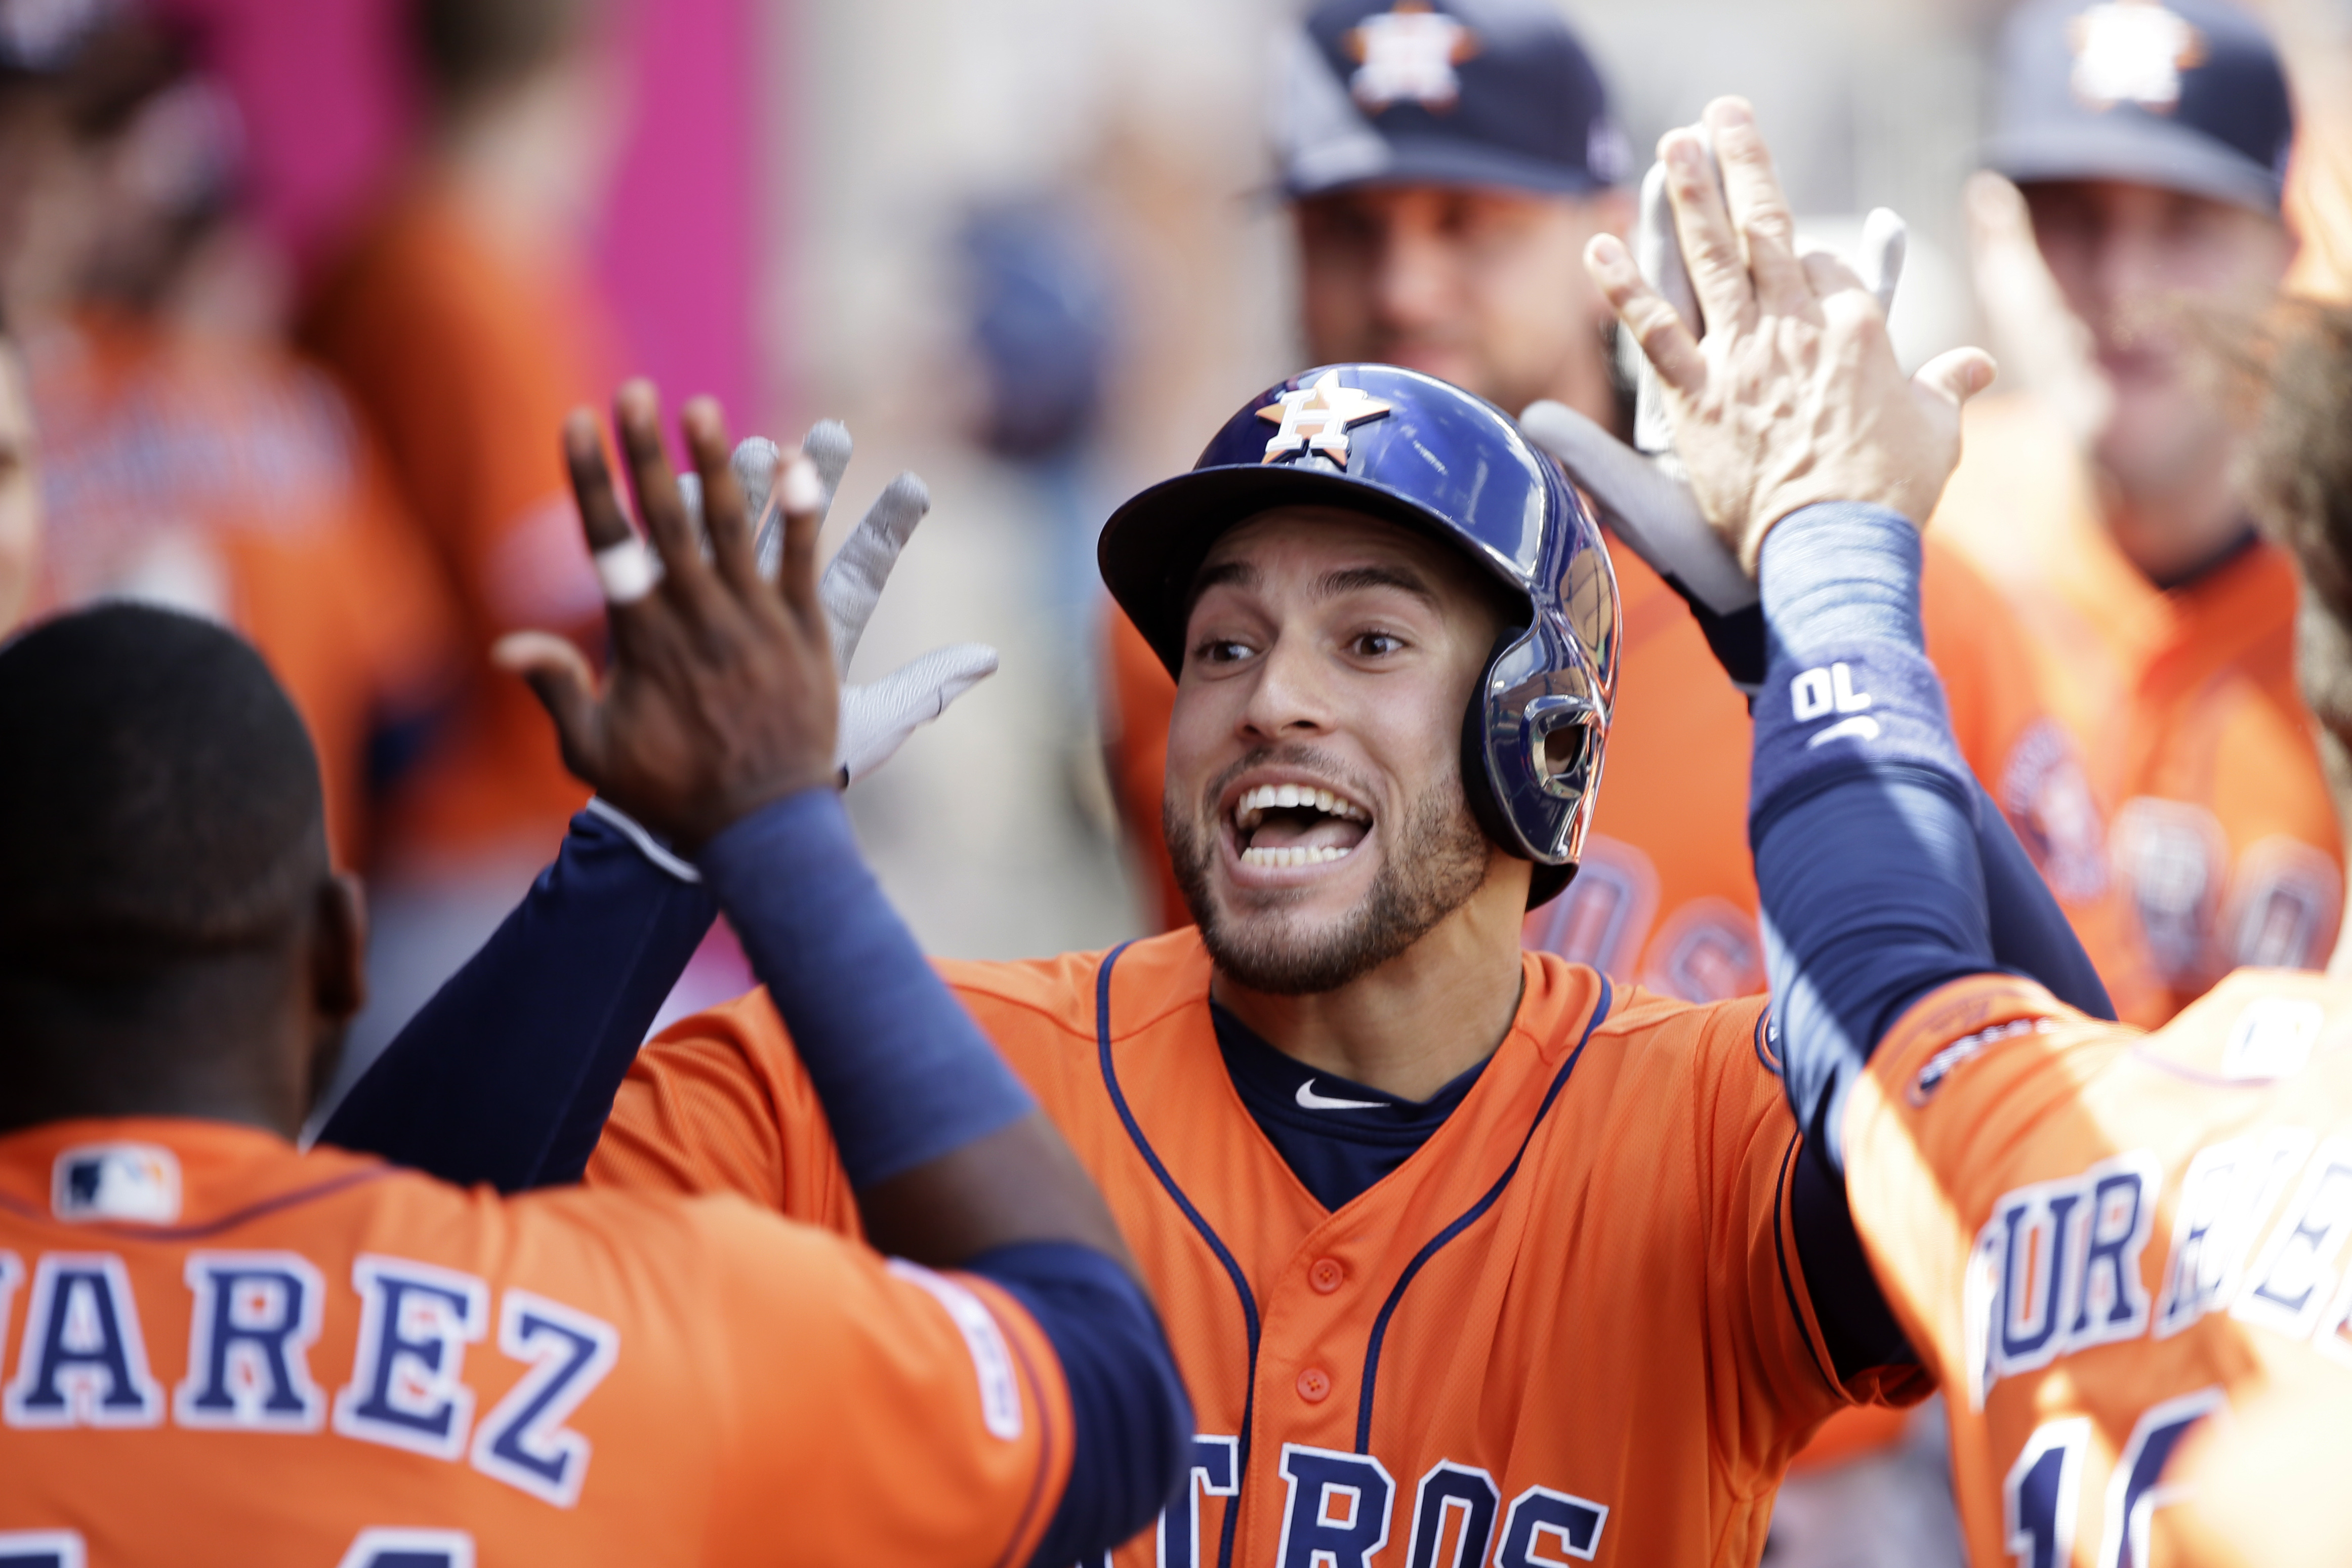 George Springer signs with Blue Jays: Ex-Astro gets 6-year, $150